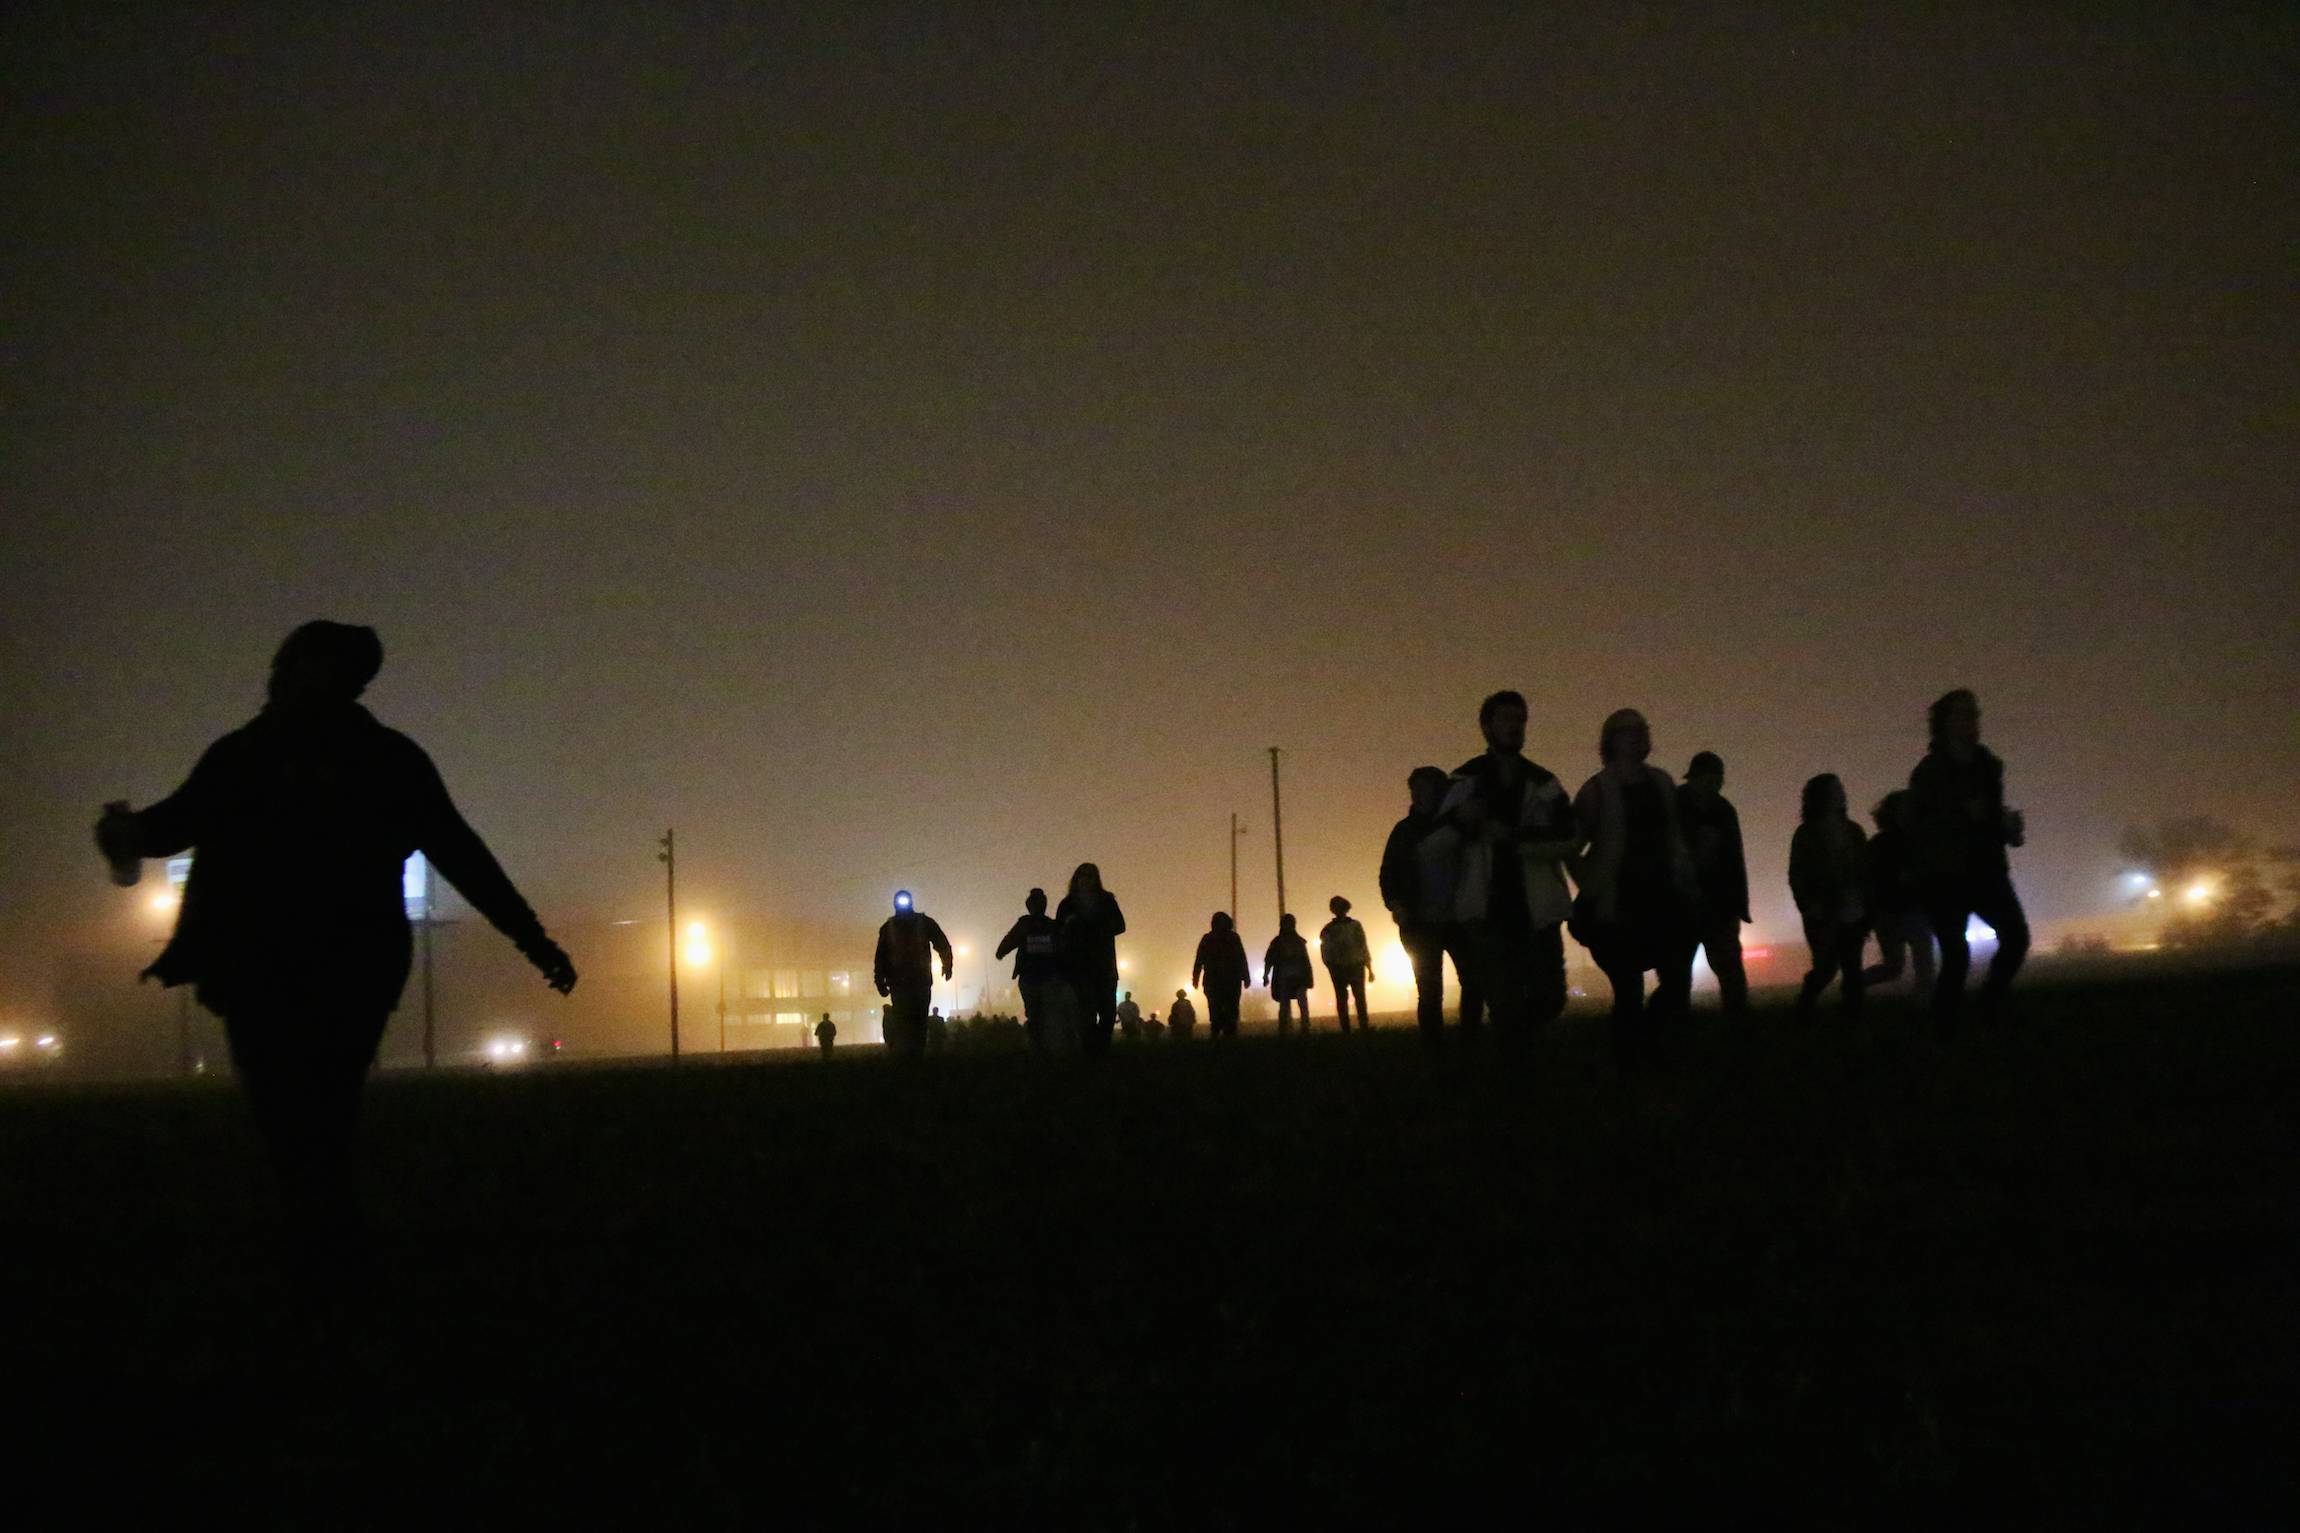 Protesters run across a field in St. Louis, in the early hours of Monday, Oct. 13, 2014. The Sunday-night protest demanded justice for a series of police killings, including Michael Brown, shot by officer Darren Wilson in Ferguson, Aug. 9, 2014.